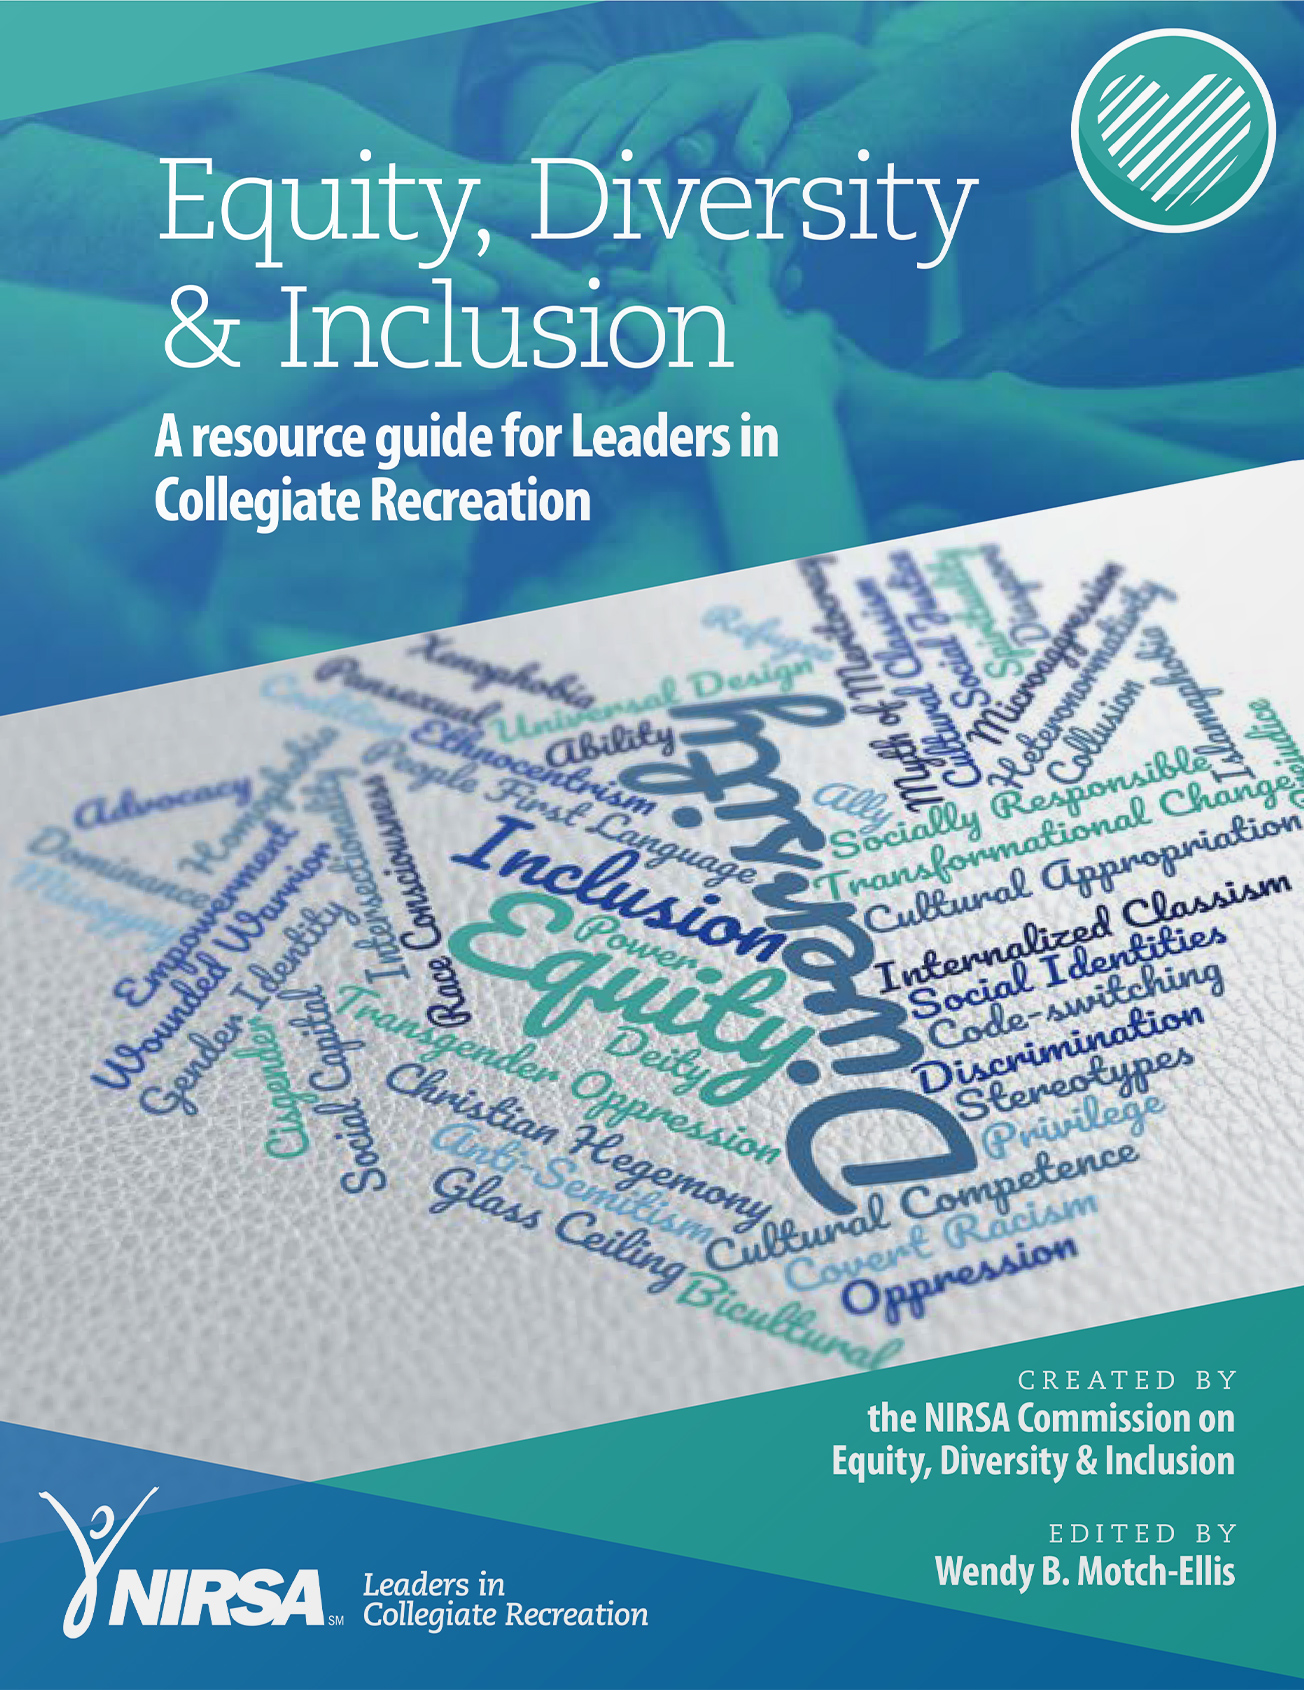 Get the NIRSA Equity, Diversity, & Inclusion Resource Guide